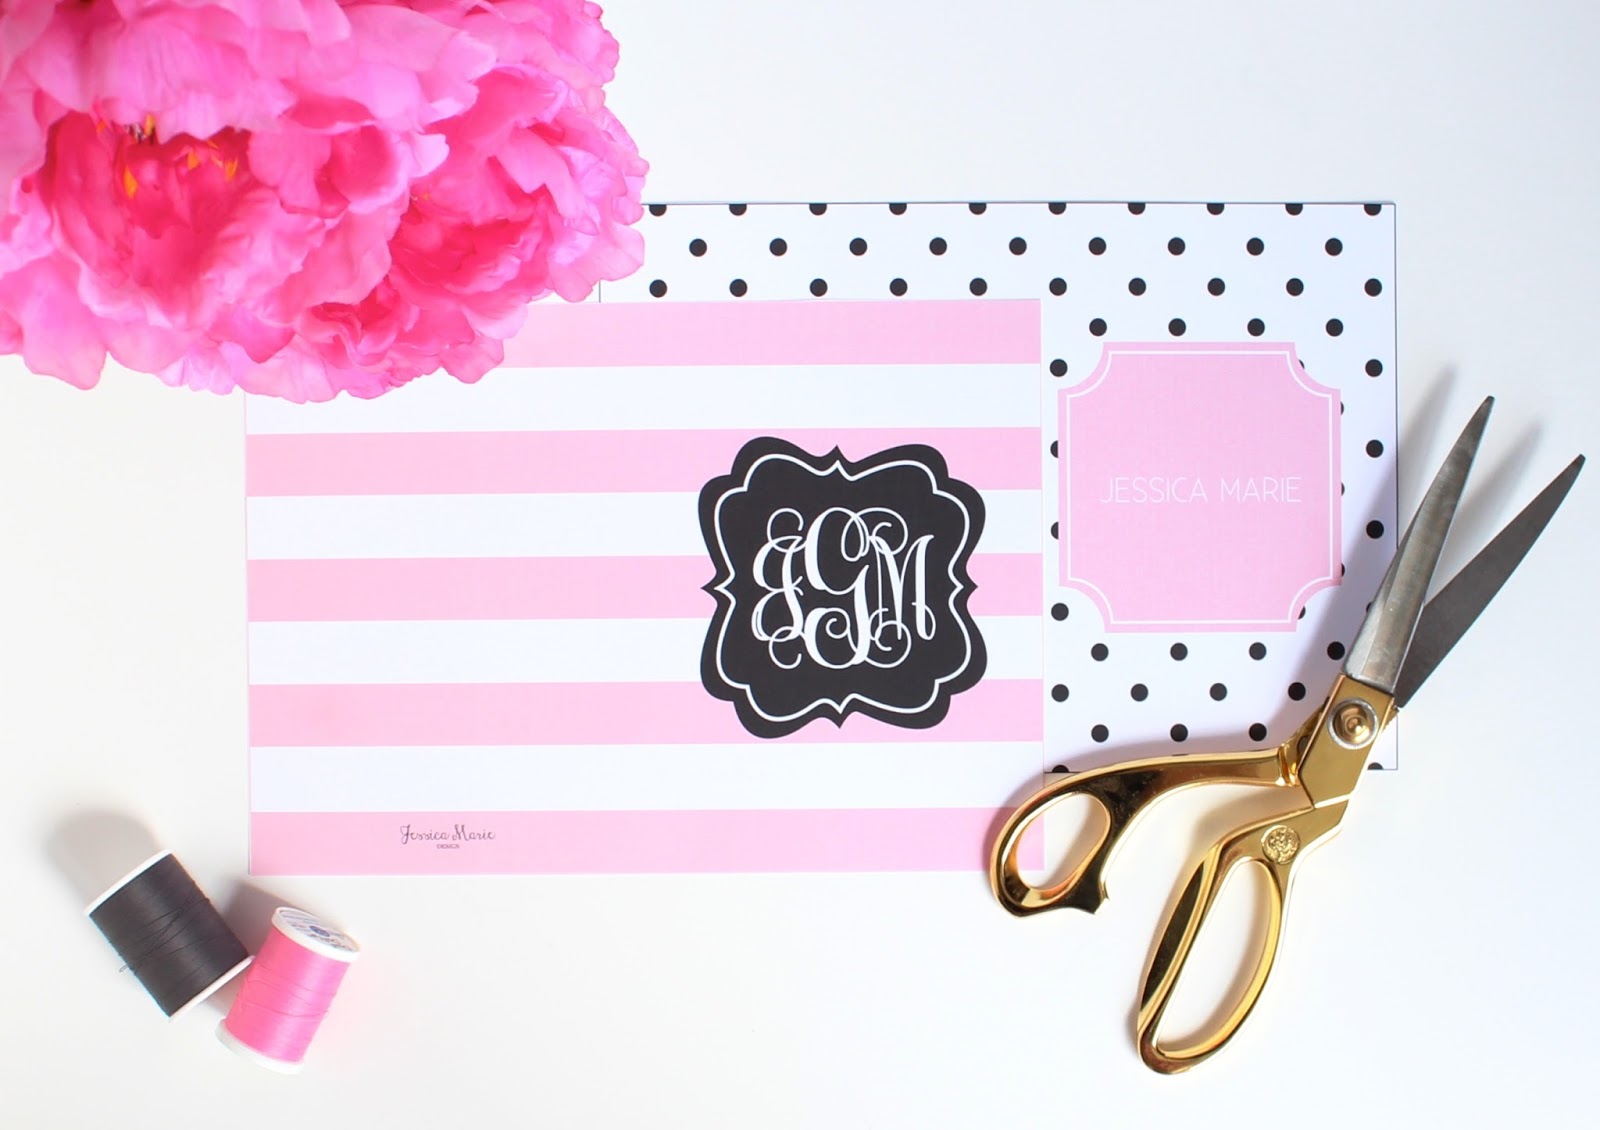  Free DIY Printable Notebooks by Jessica Marie Design